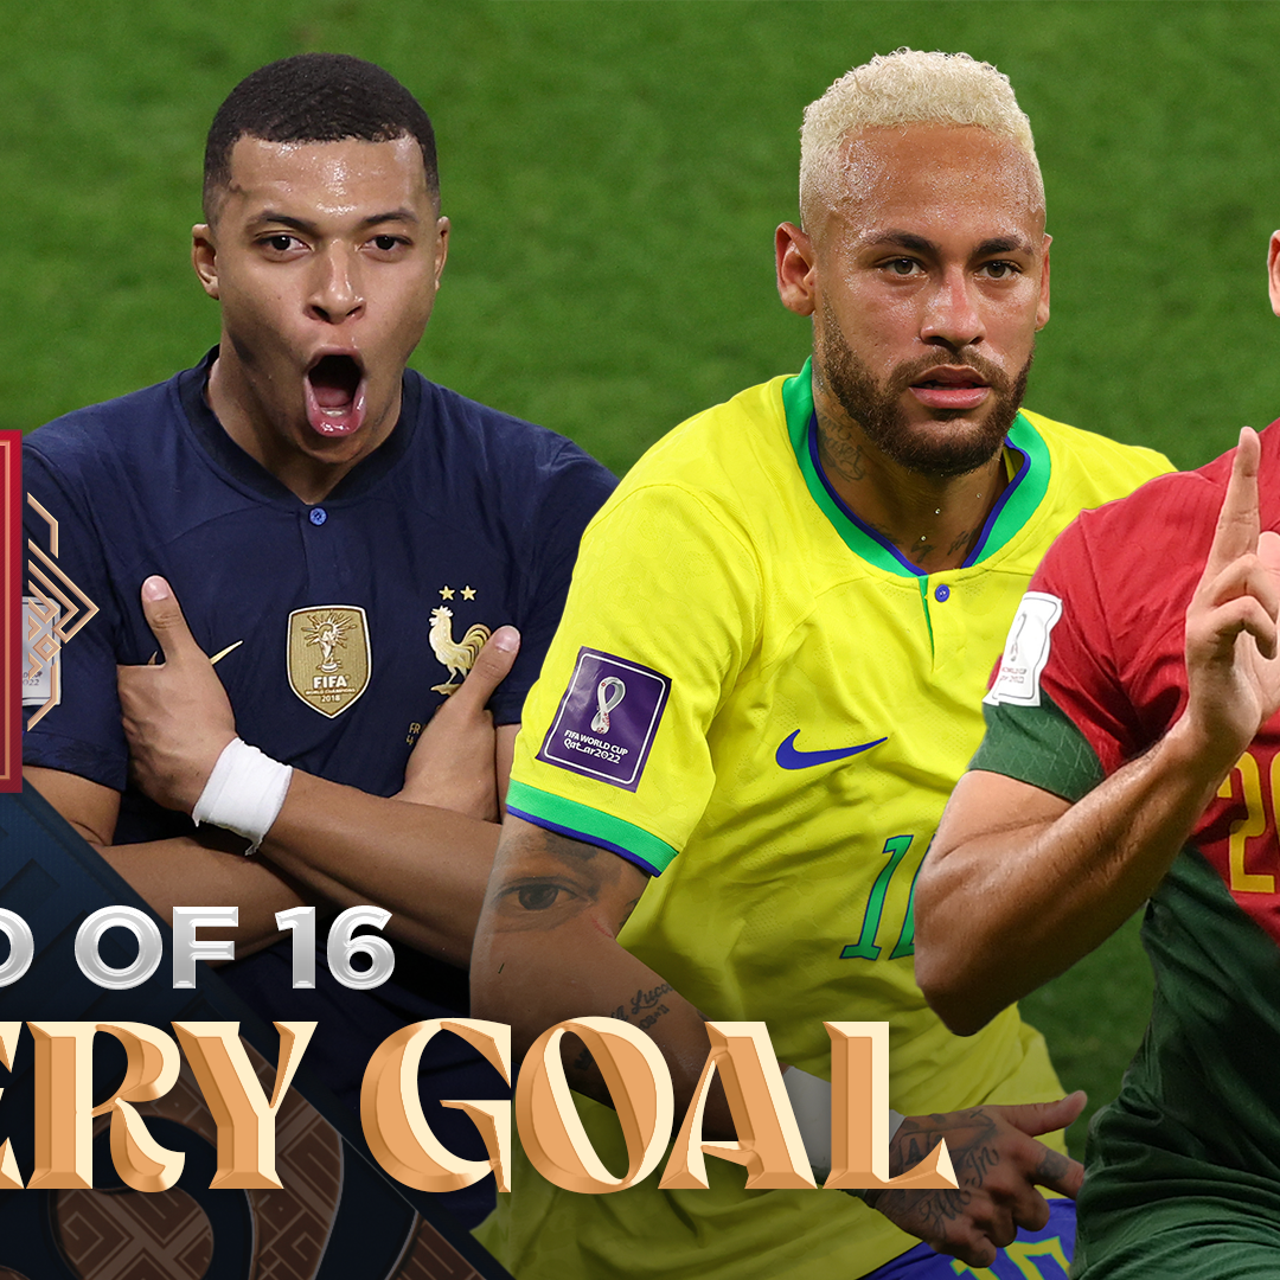 2022 FIFA World Cup Every goal from the Round of 16 FOX Soccer FOX Sports